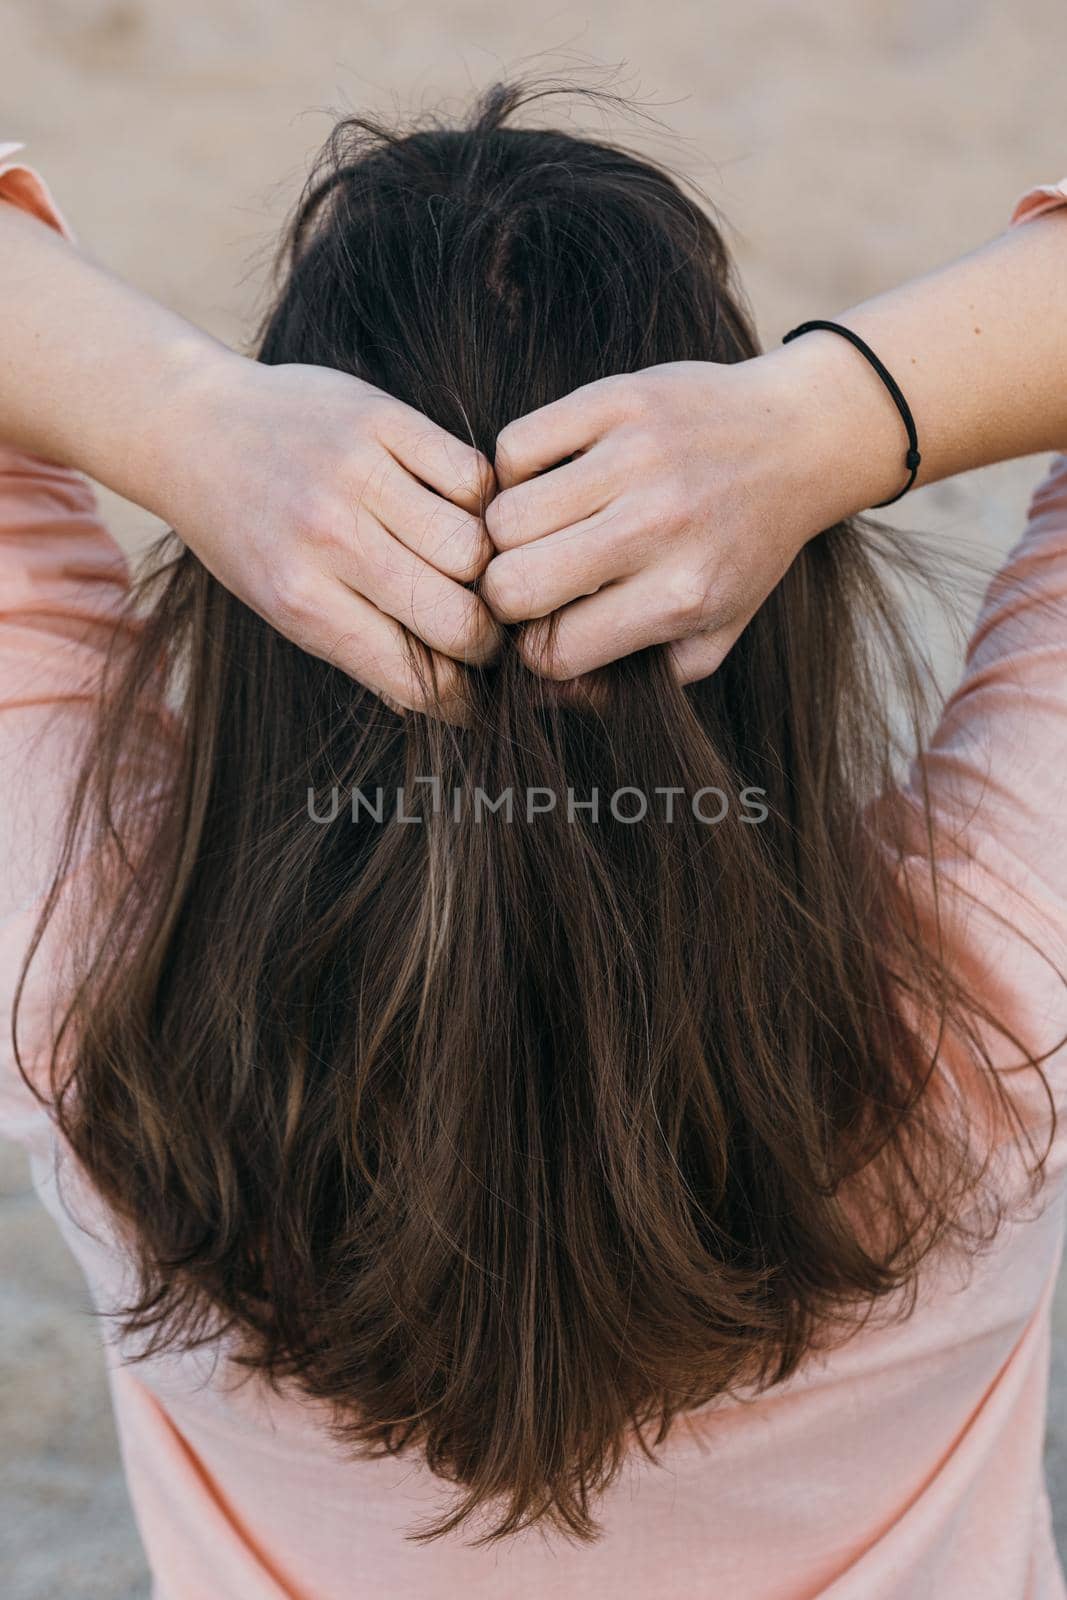 A woman in pink shirt holding her natural hair with both hands. Brunette woman with long hair, view from the back